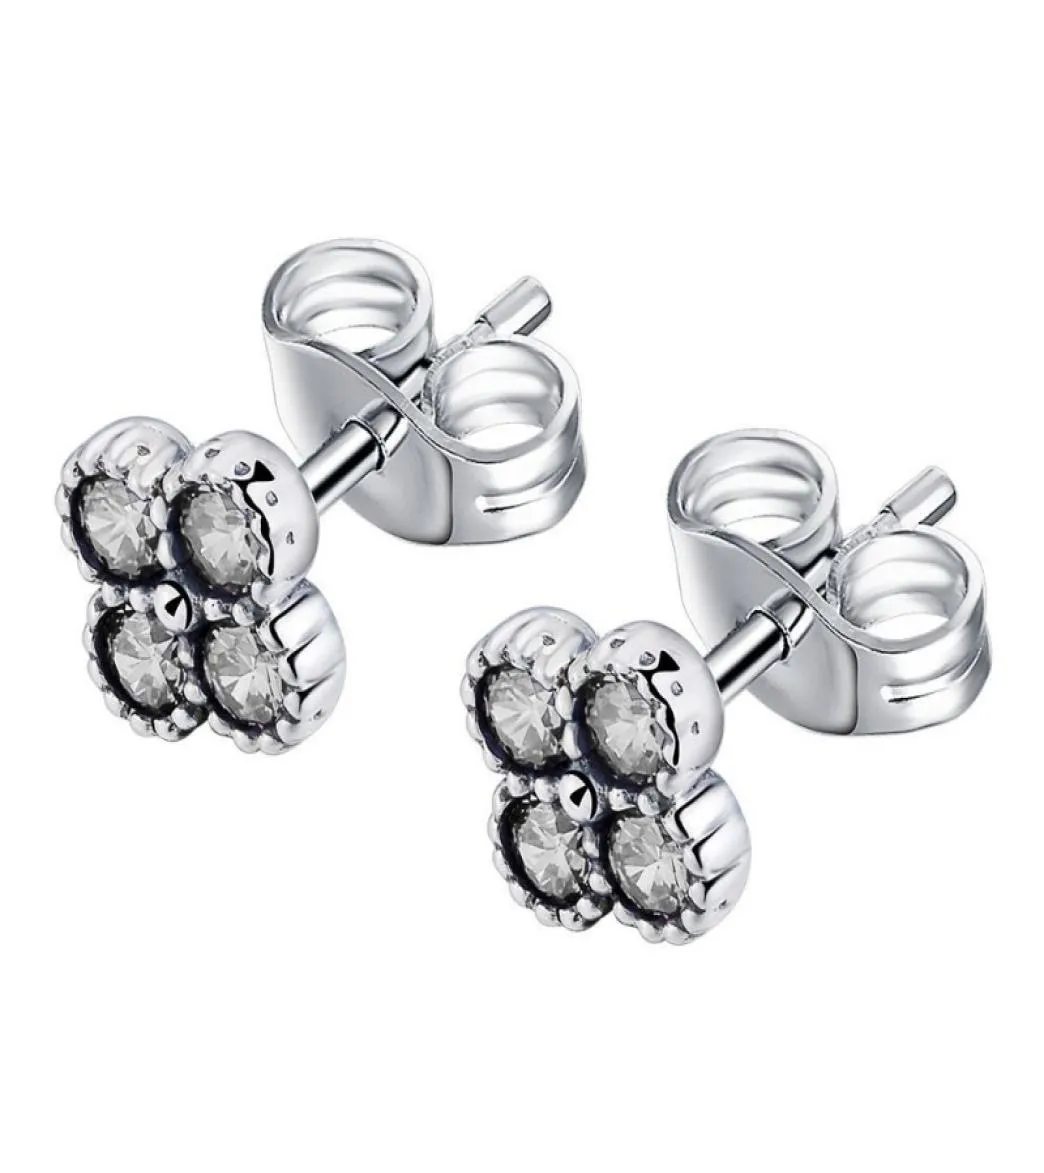 Authentic 925 Sterling Silver Stud Earring Pretty Blossom With Crystal Earrings For Women Wedding Gift fit Delicate Charm Jewelry1108757